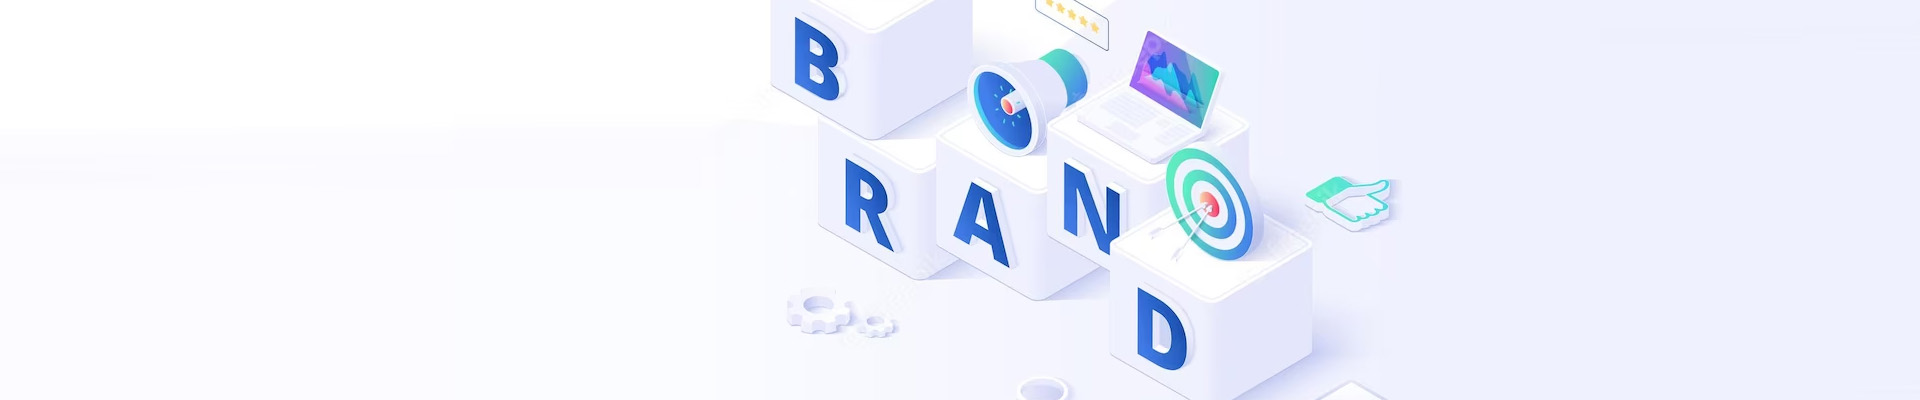 The Importance of Brand Positioning | By Design
